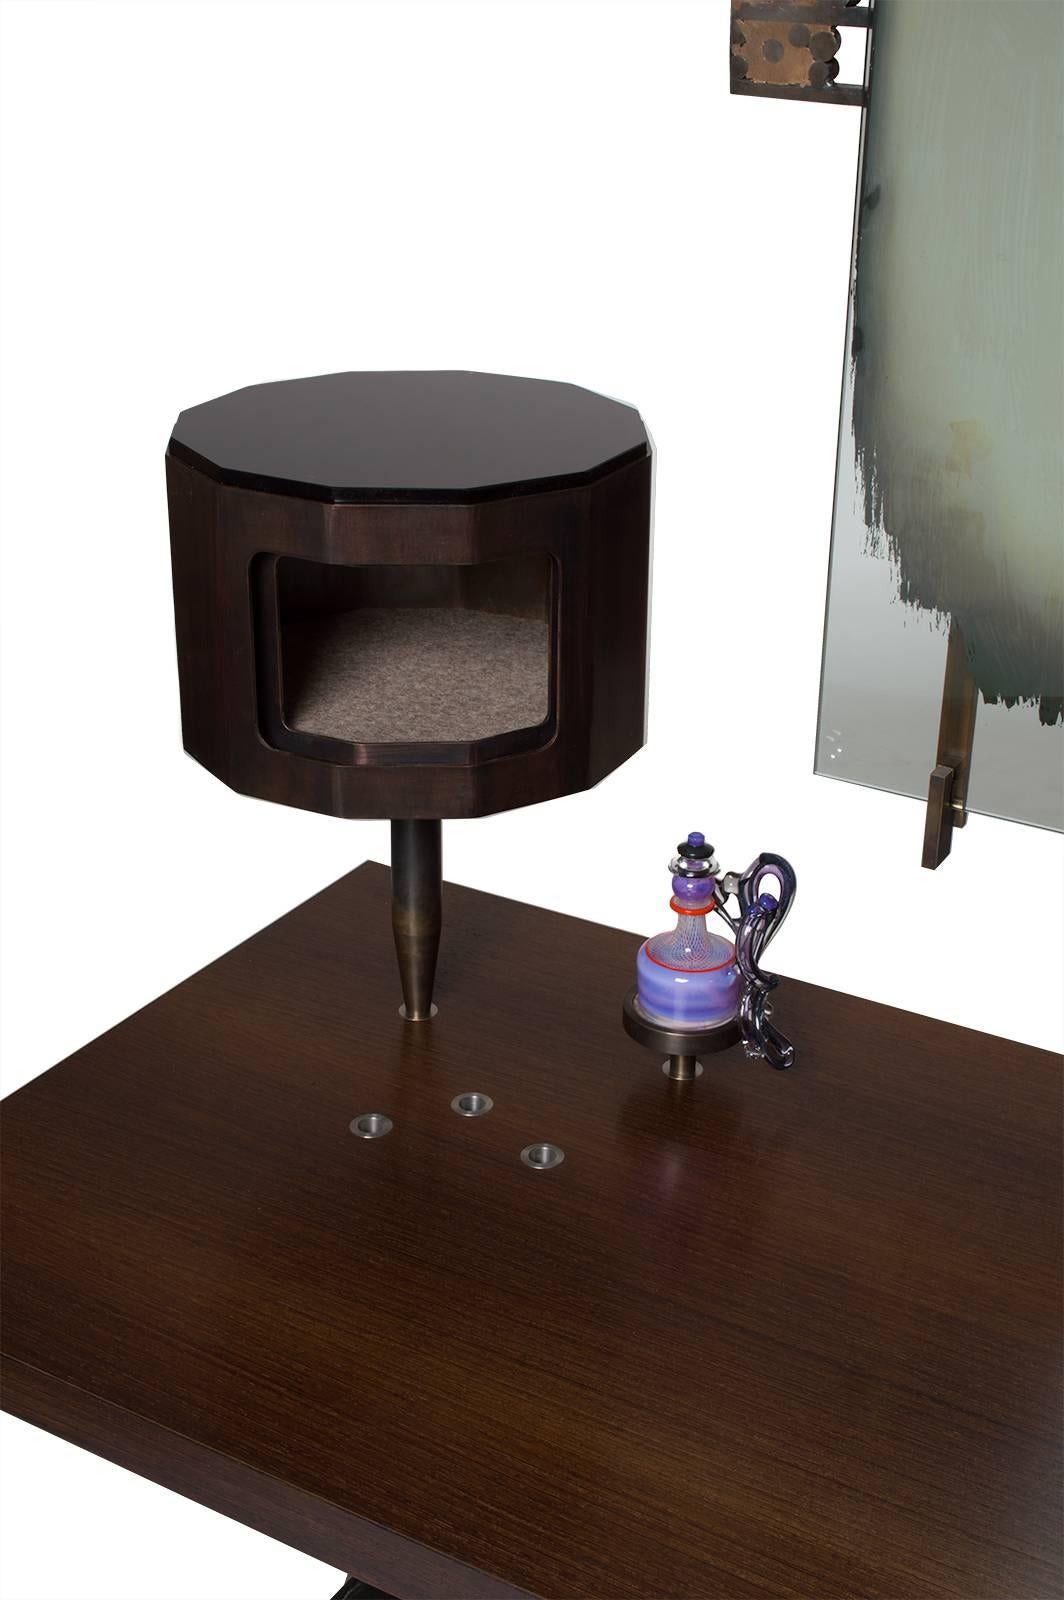 Datum vanity with a matching leather upholstered chair. Mirror with a blown perfume bottle and patinated brass holder. This piece is a unique creation from 2016.

All of the works from my Datum series have stainless steel inserts mounted flush to